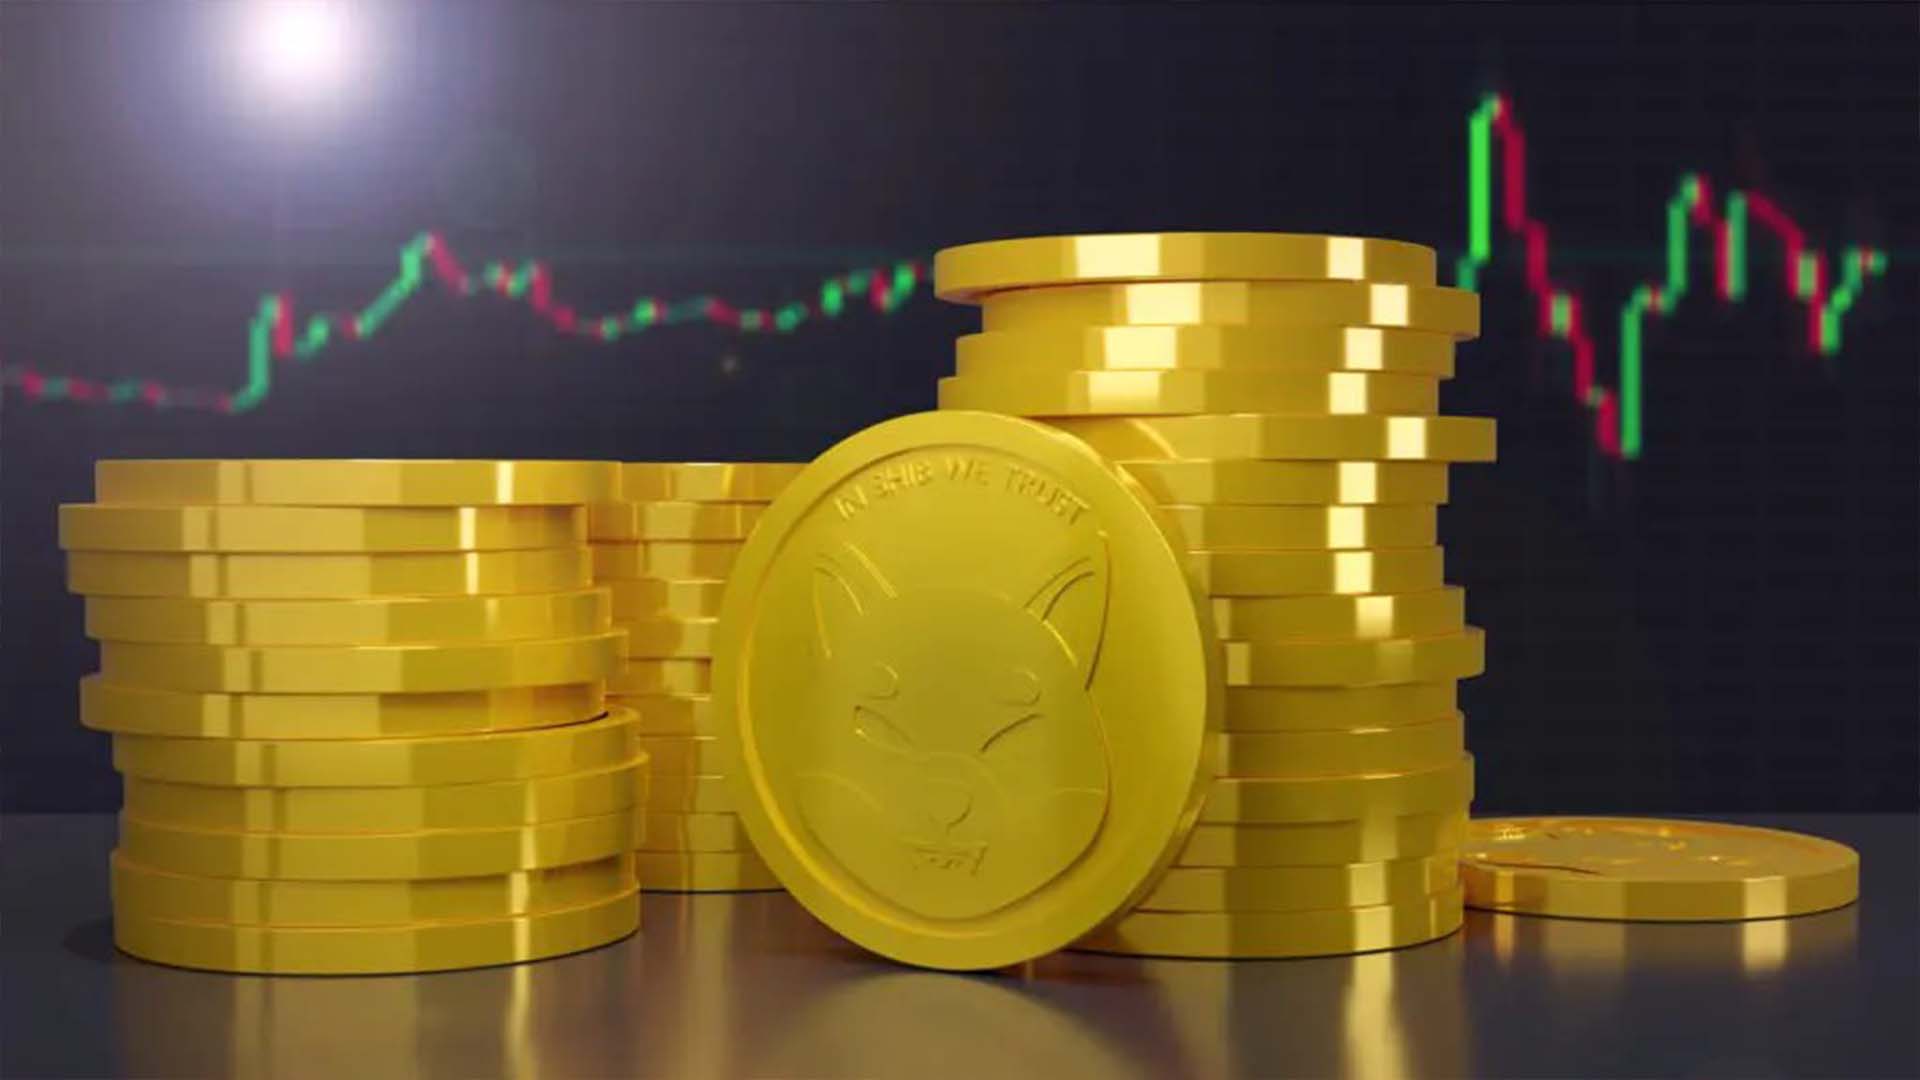 Shiba Inu Drops Investors Holding by 5%, While HedgeUp Presale Gains Staggering 300%